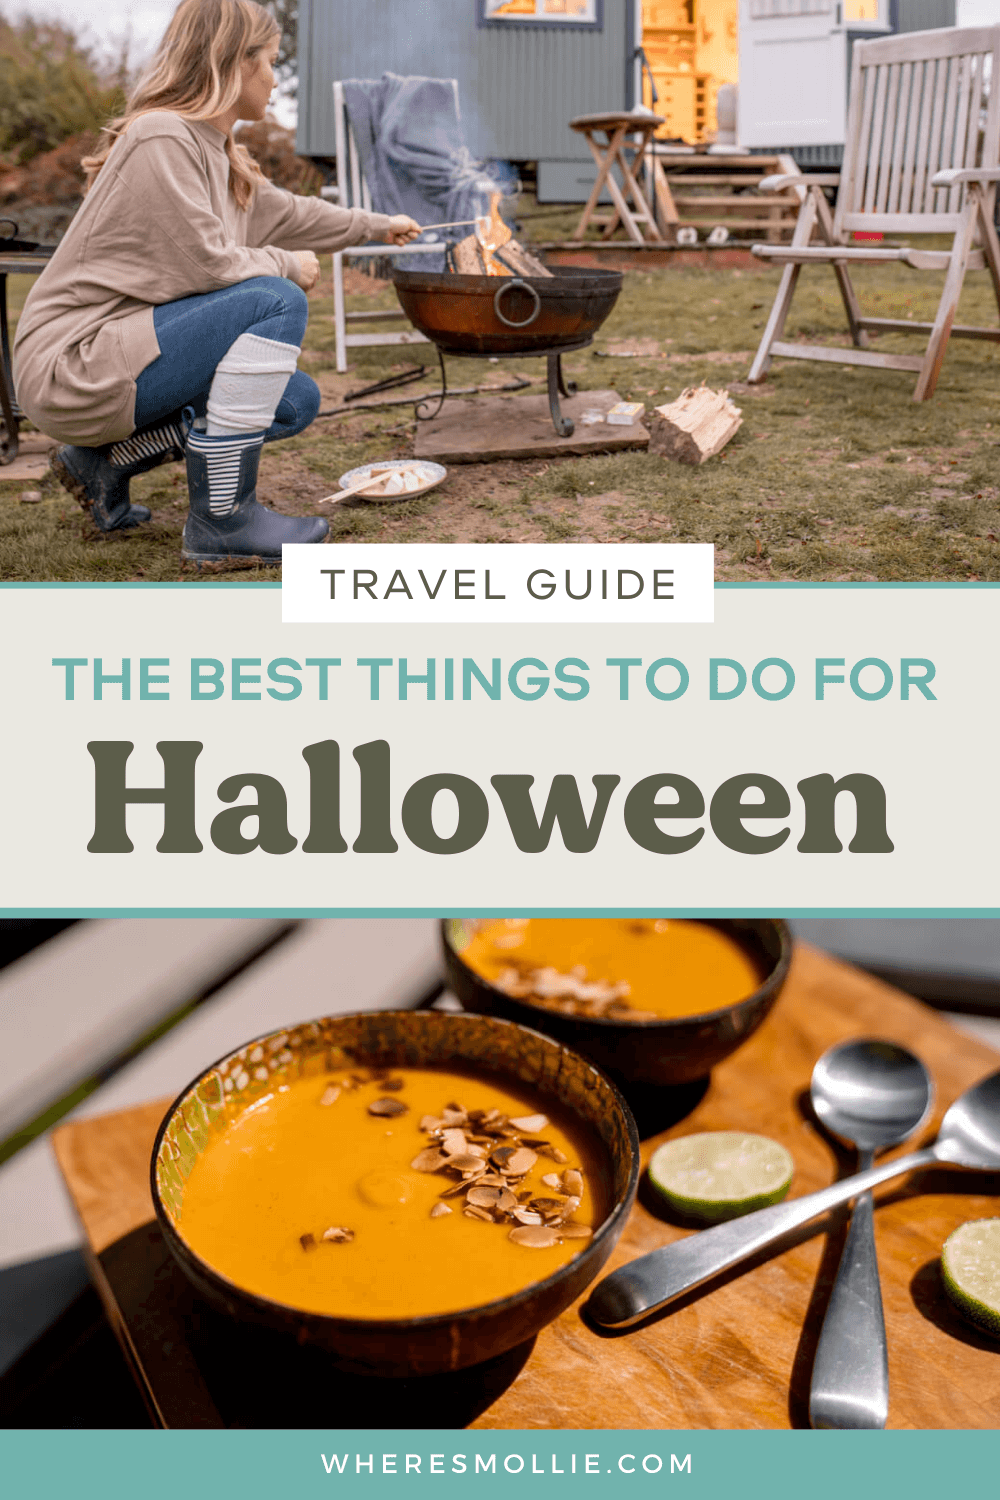 The best things to do for Halloween 2021